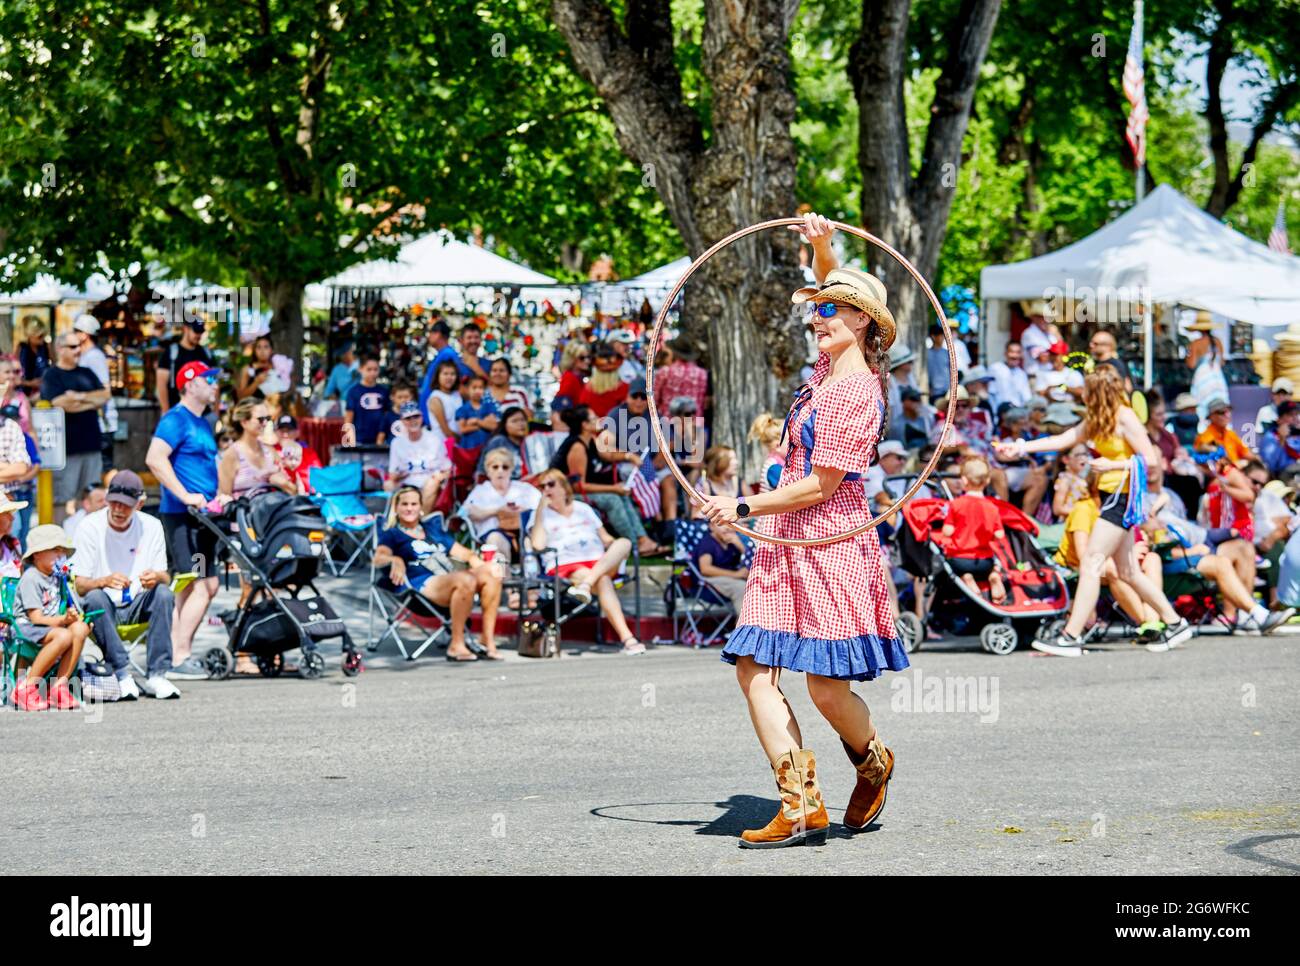 Prescott, Arizona, USA - July 3, 2021: Woman spinning the hula hoop while marching in the 4th of July parade Stock Photo